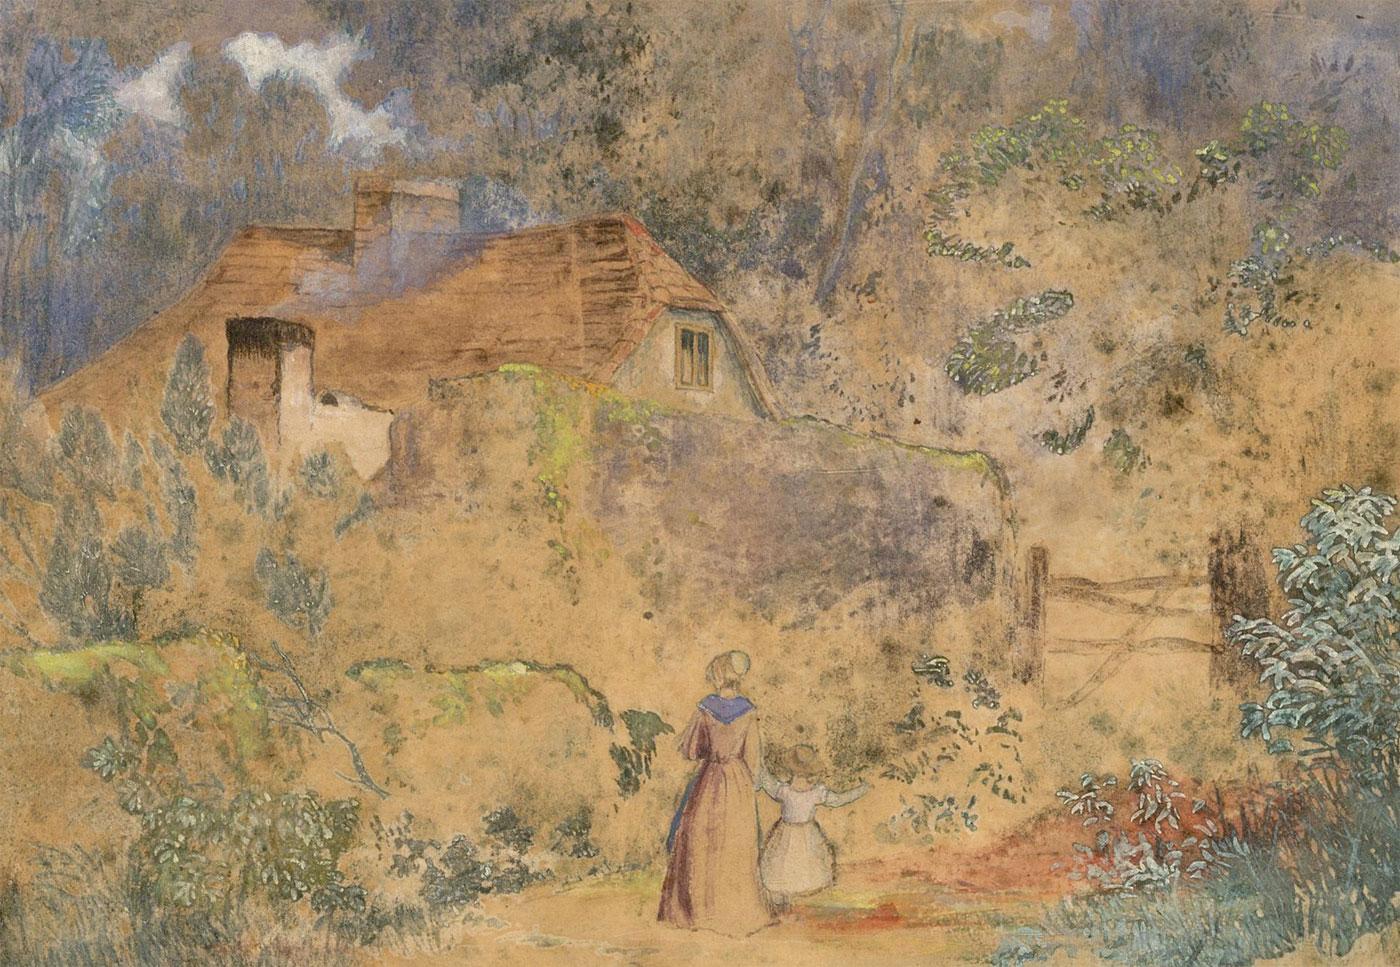 Robert Tucker (1807-1891)- Mid 19th Century Watercolour, Cottage in the Woods - Brown Landscape Art by Unknown